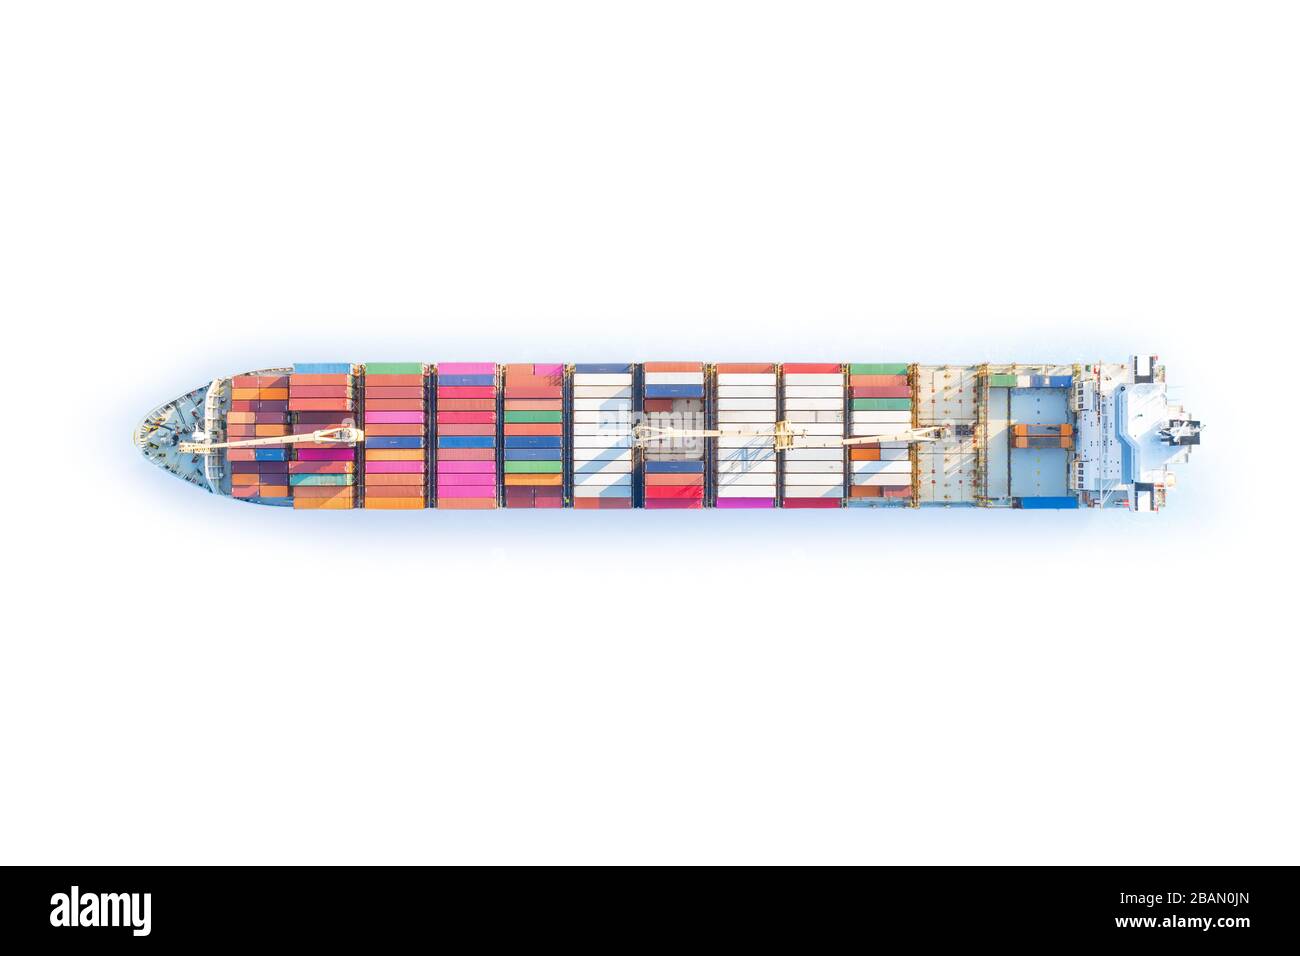 Large full loaded container ship sailing bright blue sea. Top view isolated on white, clipping path included Stock Photo